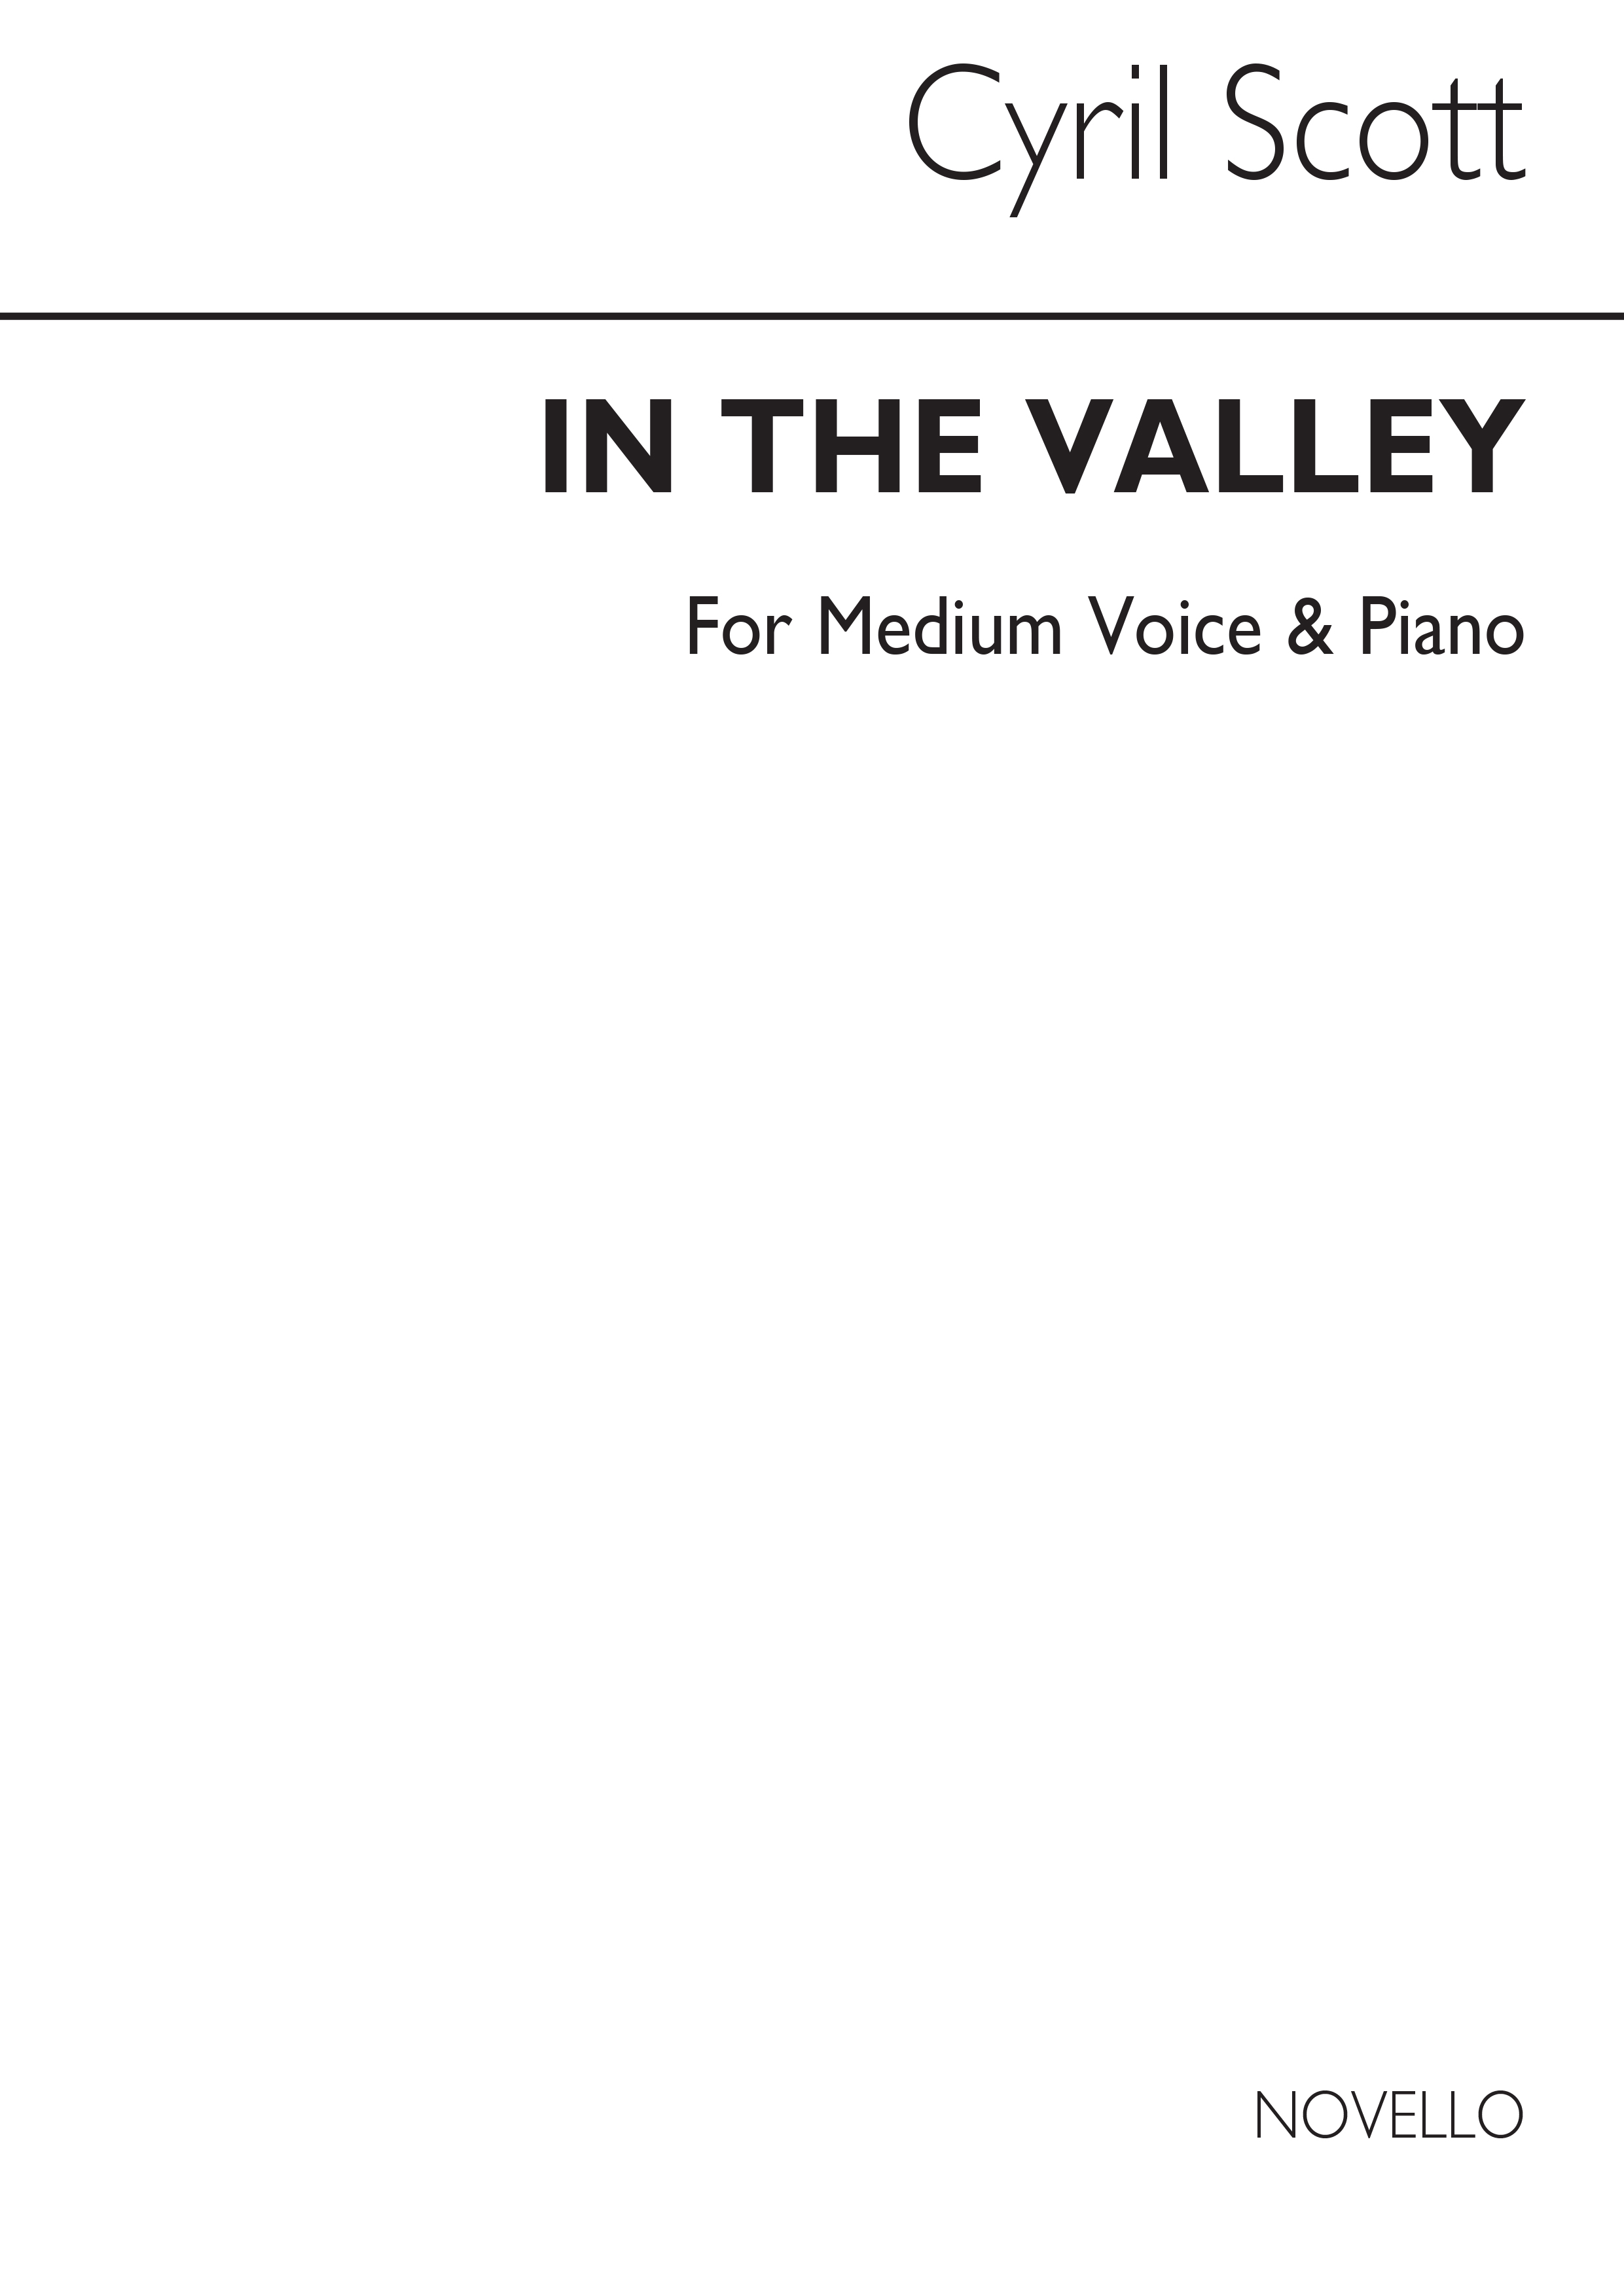 Cyril Scott: In The Valley-medium Voice/Piano